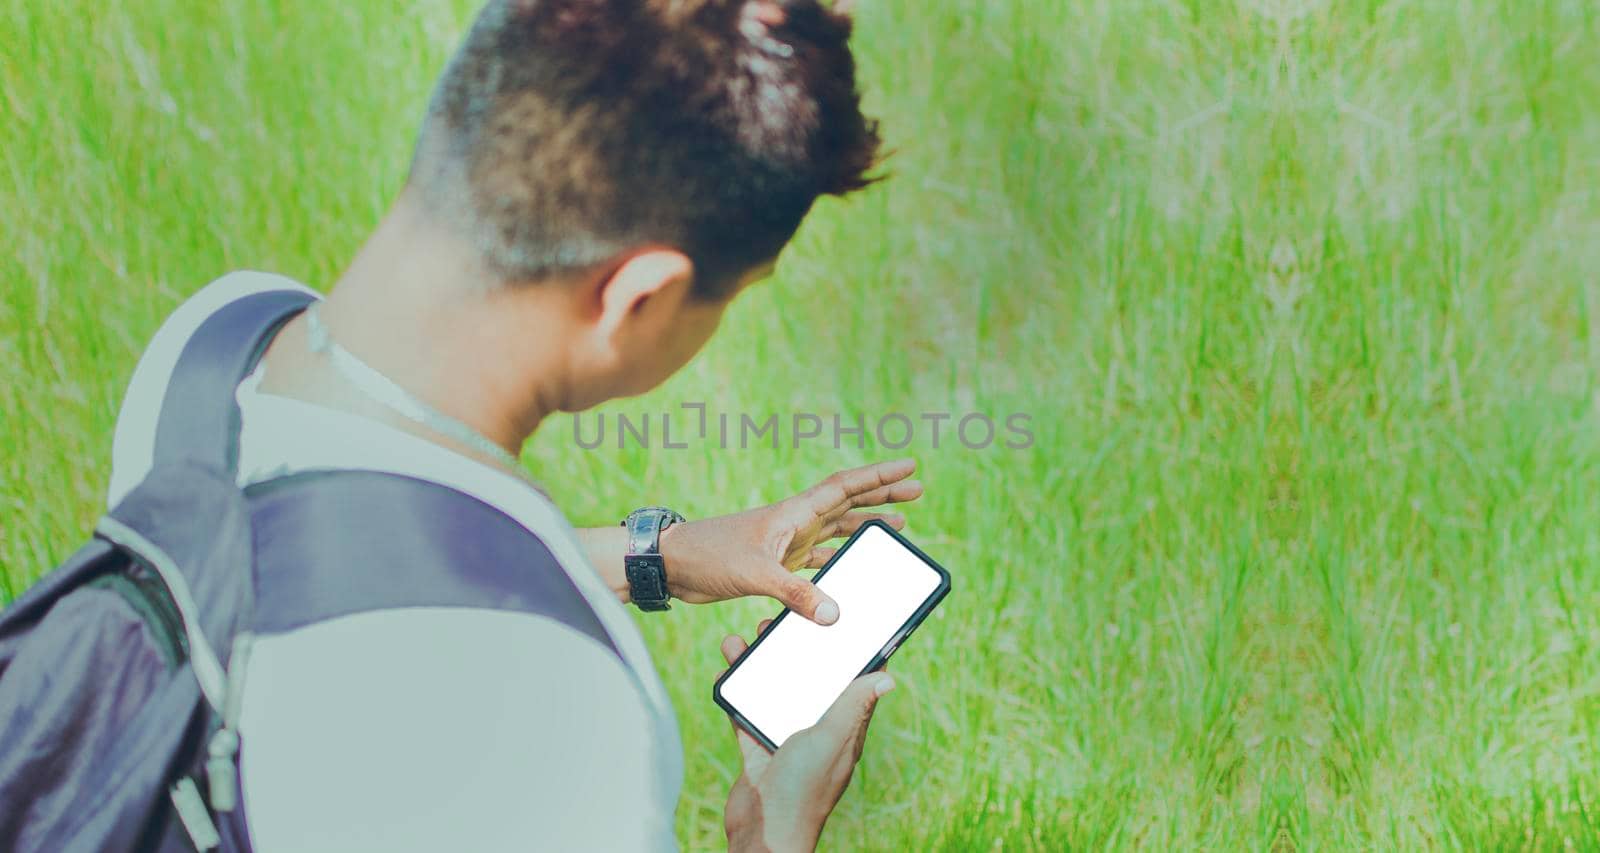 Close up of a man with cell phone in hand, close up shot of a person checking his cell phone, young guy with cell phone in hand with copy space